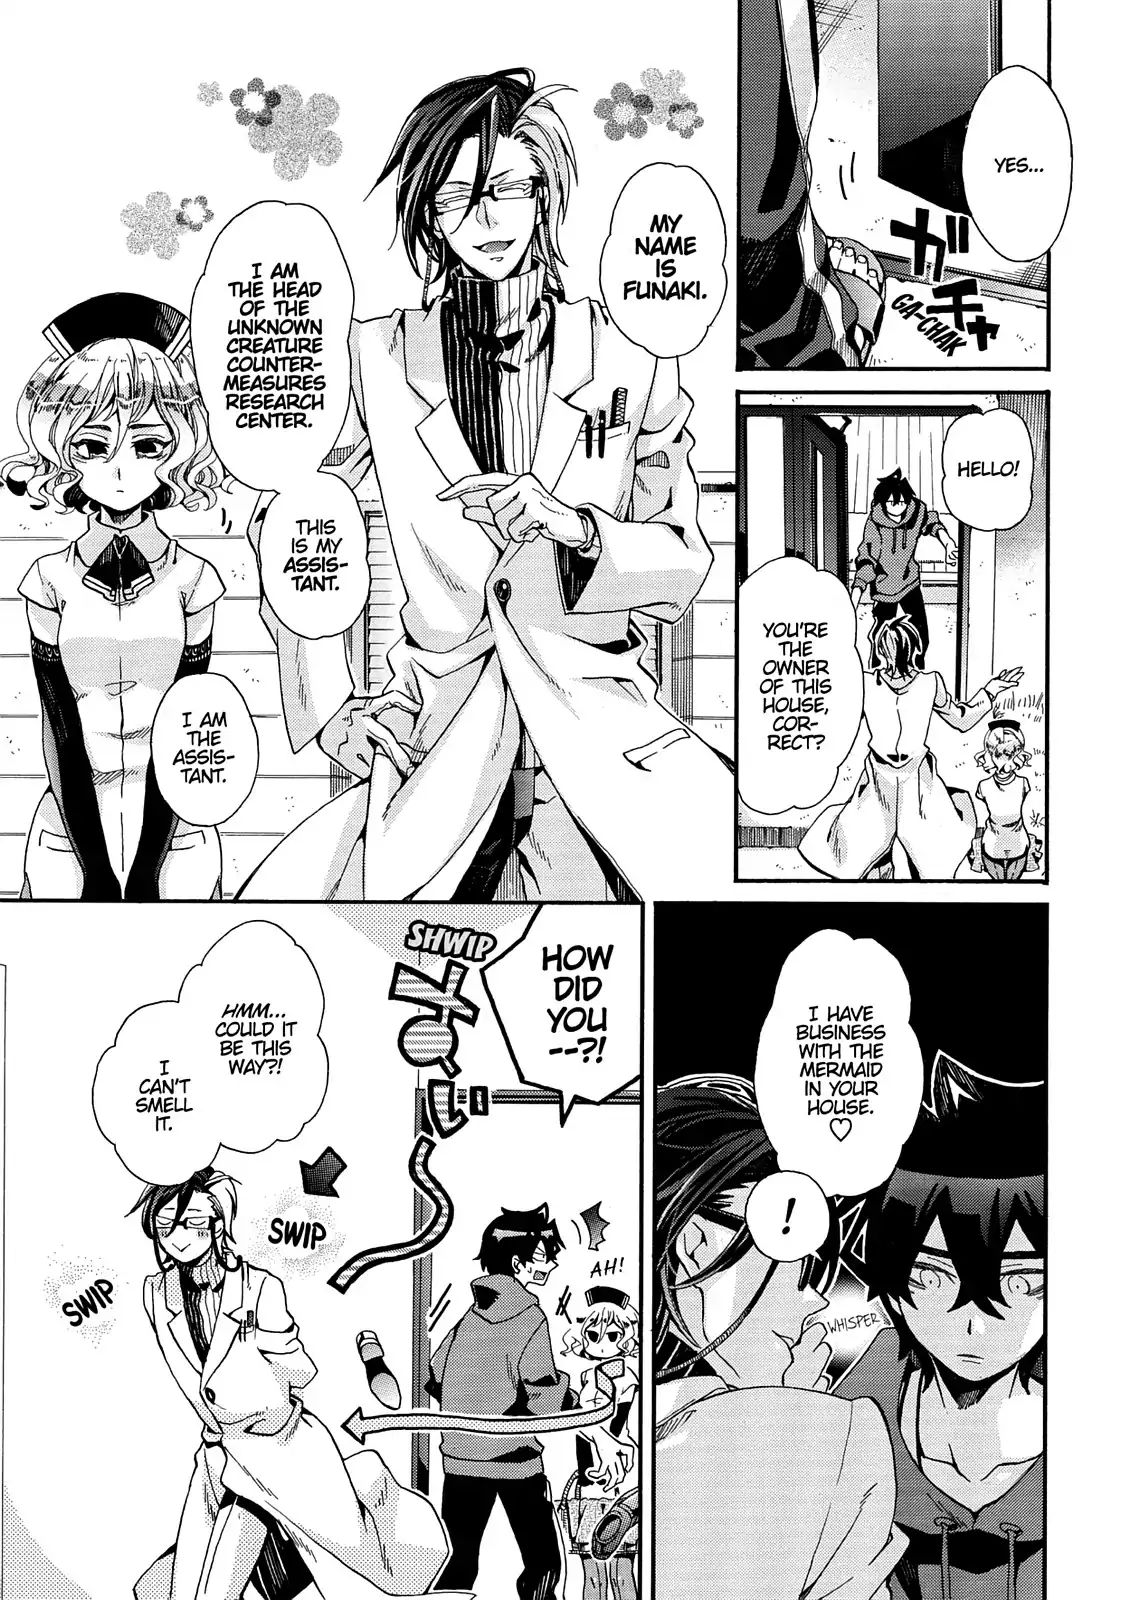 Orenchi No Furo Jijou Vol.7 Chapter 96: Mad Scientist Funaki?! Part One Of Two - Picture 3